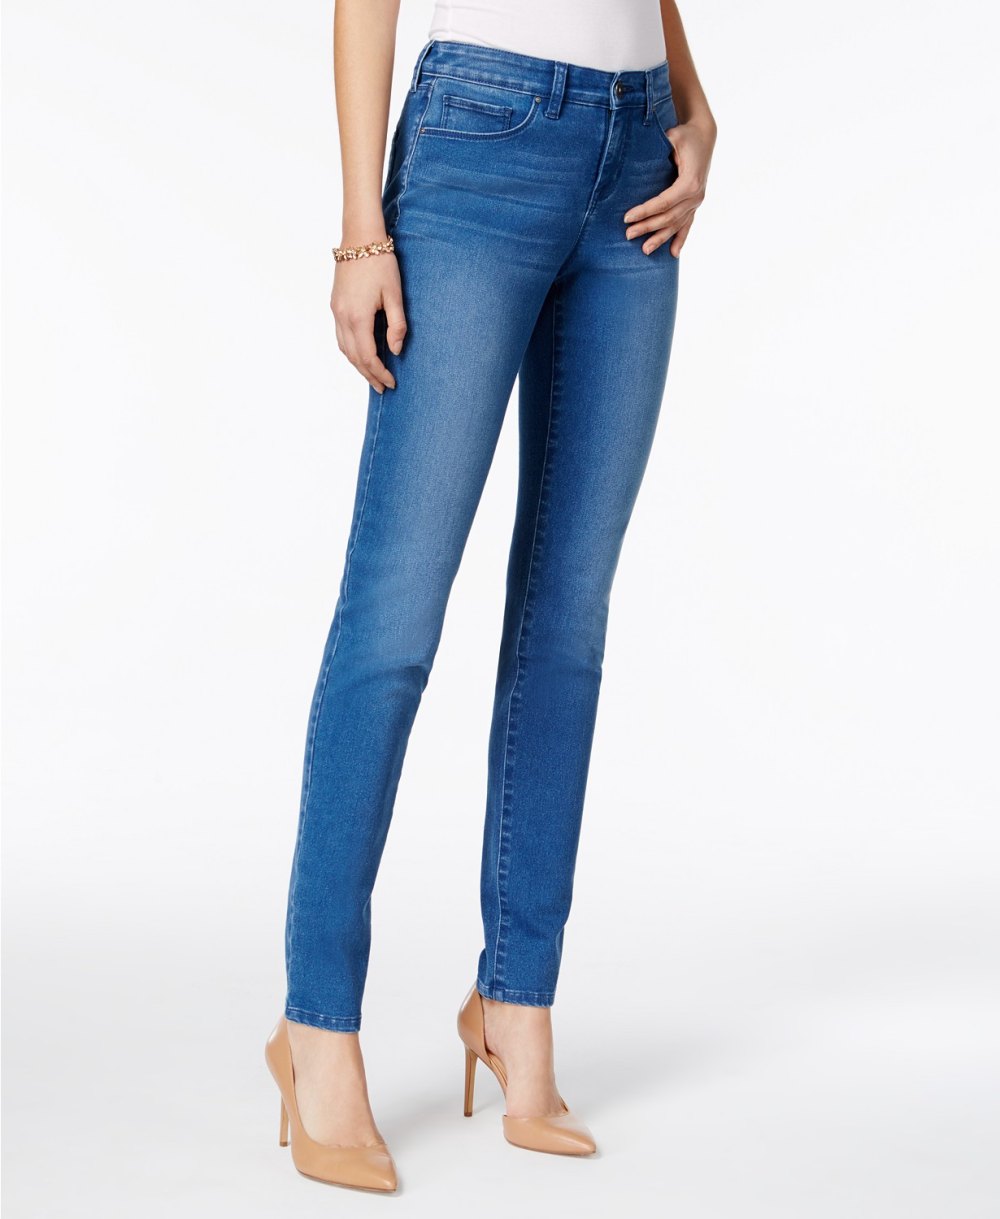 style & co curvy fit skinny jeans